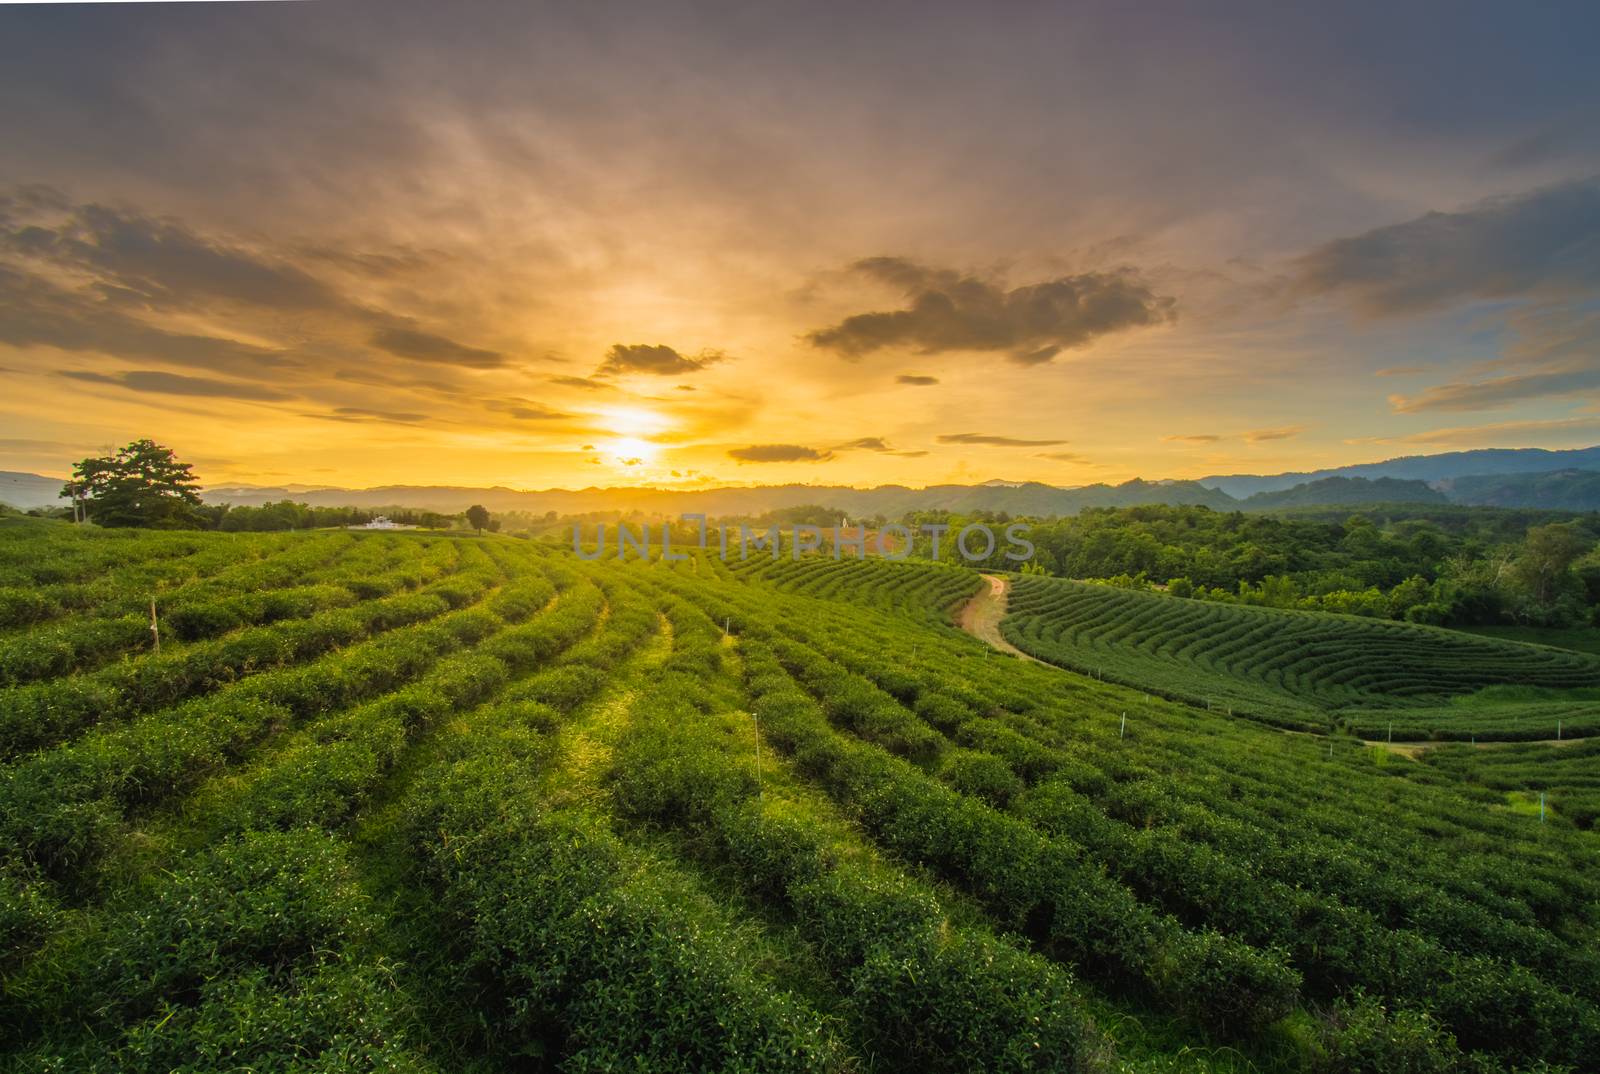 Beautiful sunsets at Chui Fong Tea Plantation   This is a popular tourist attraction in Chiang Rai. Beautiful sunset